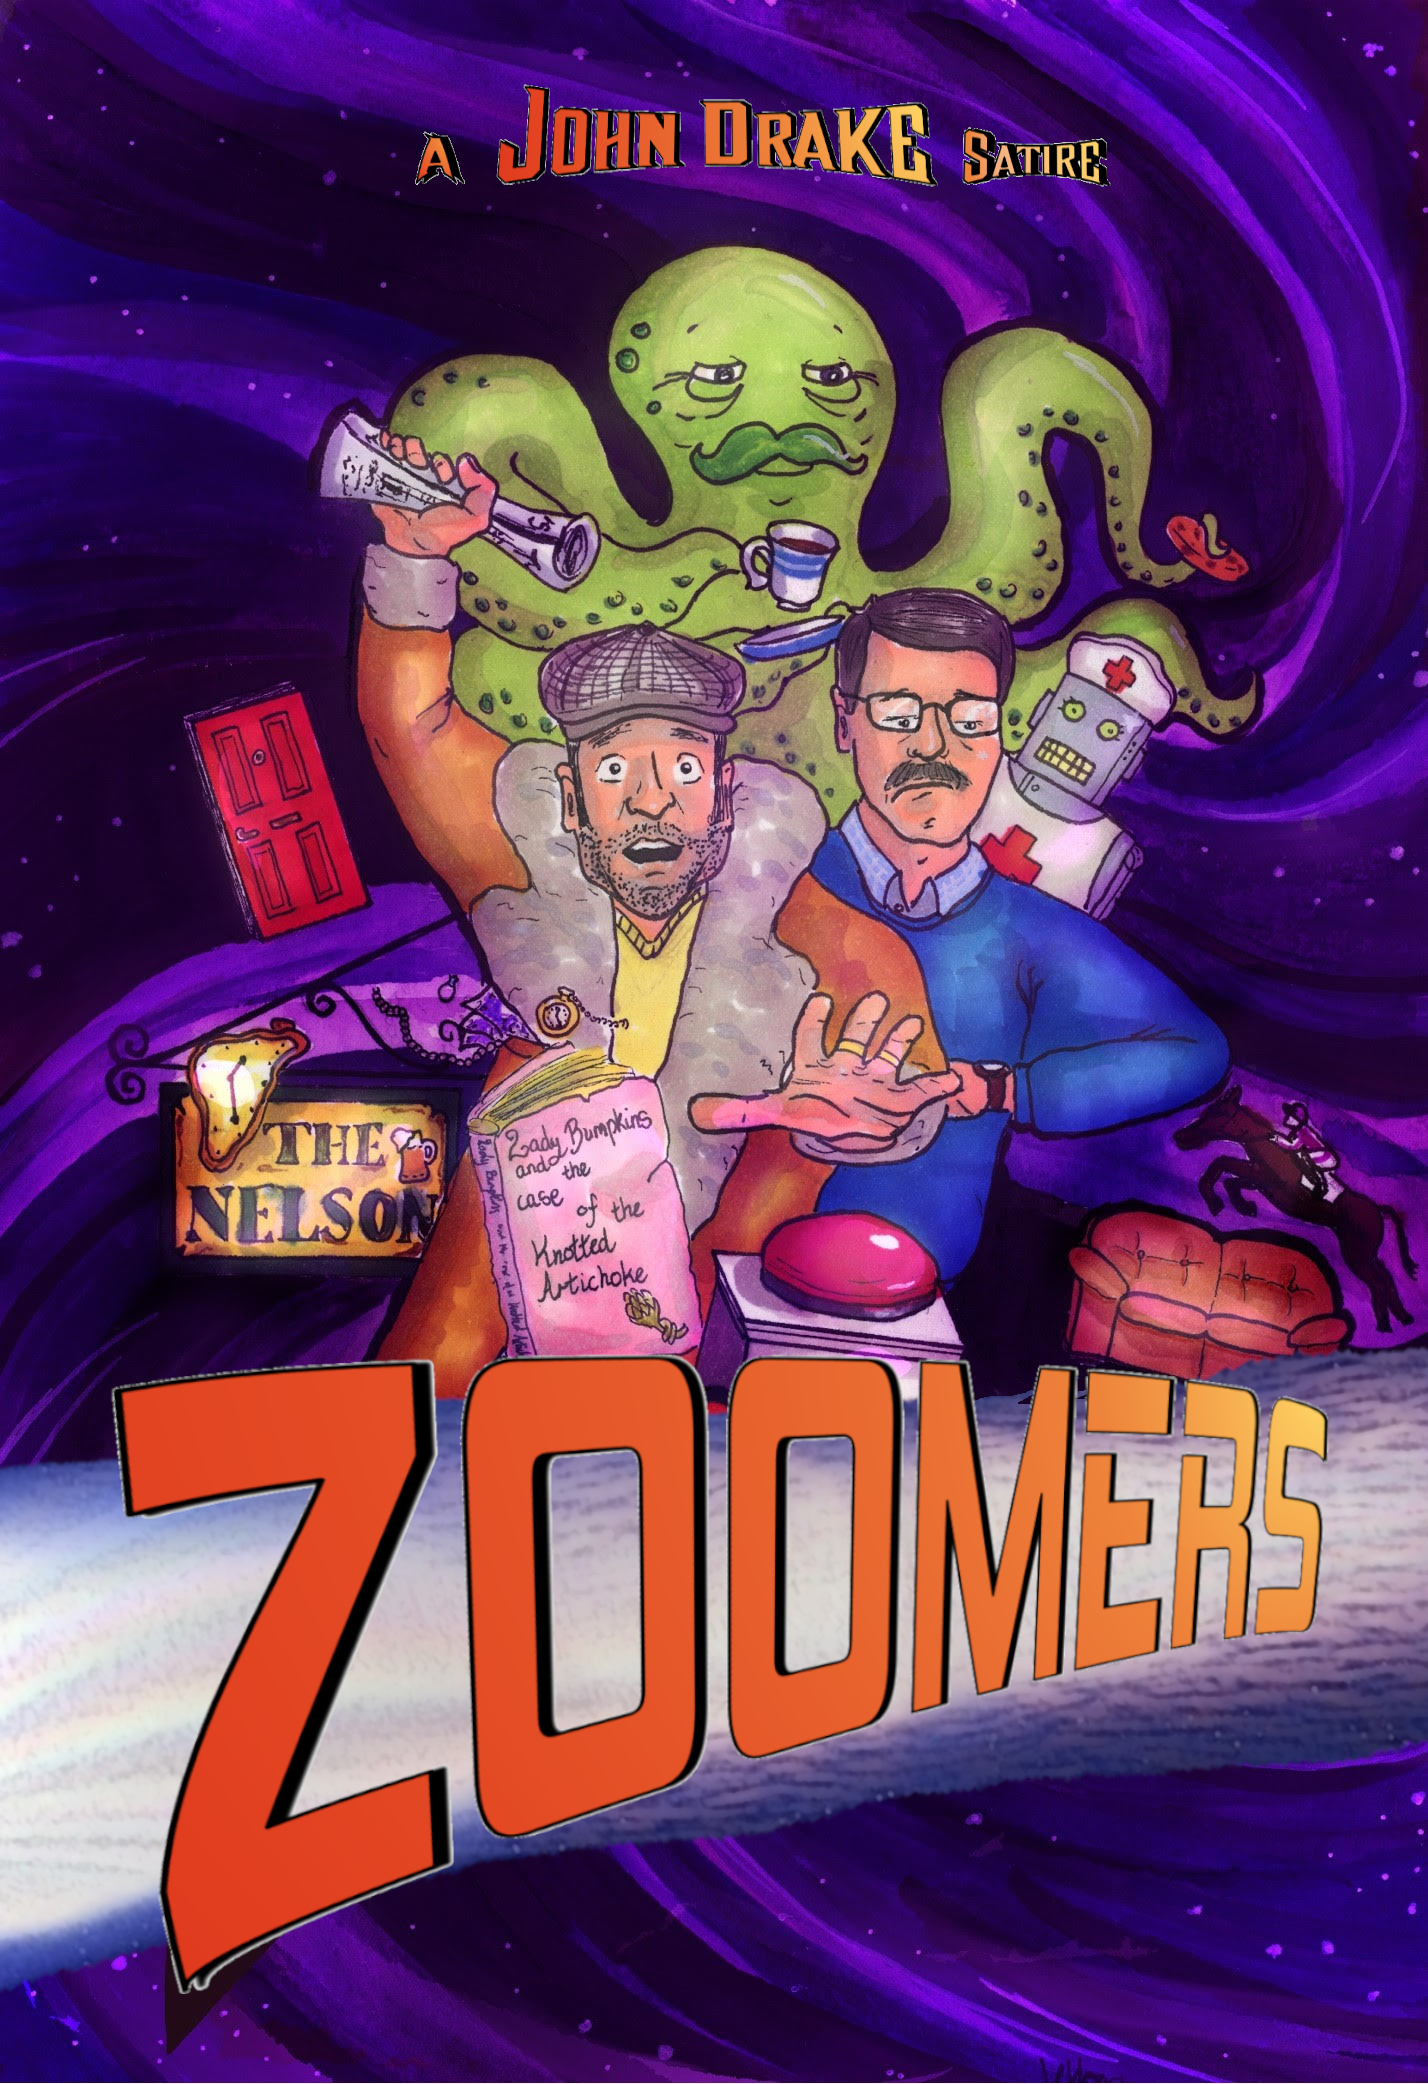 Do you like to play it safe and read the reviews first? We have a new review on Zoomers by John Drake that you won’t want to miss!